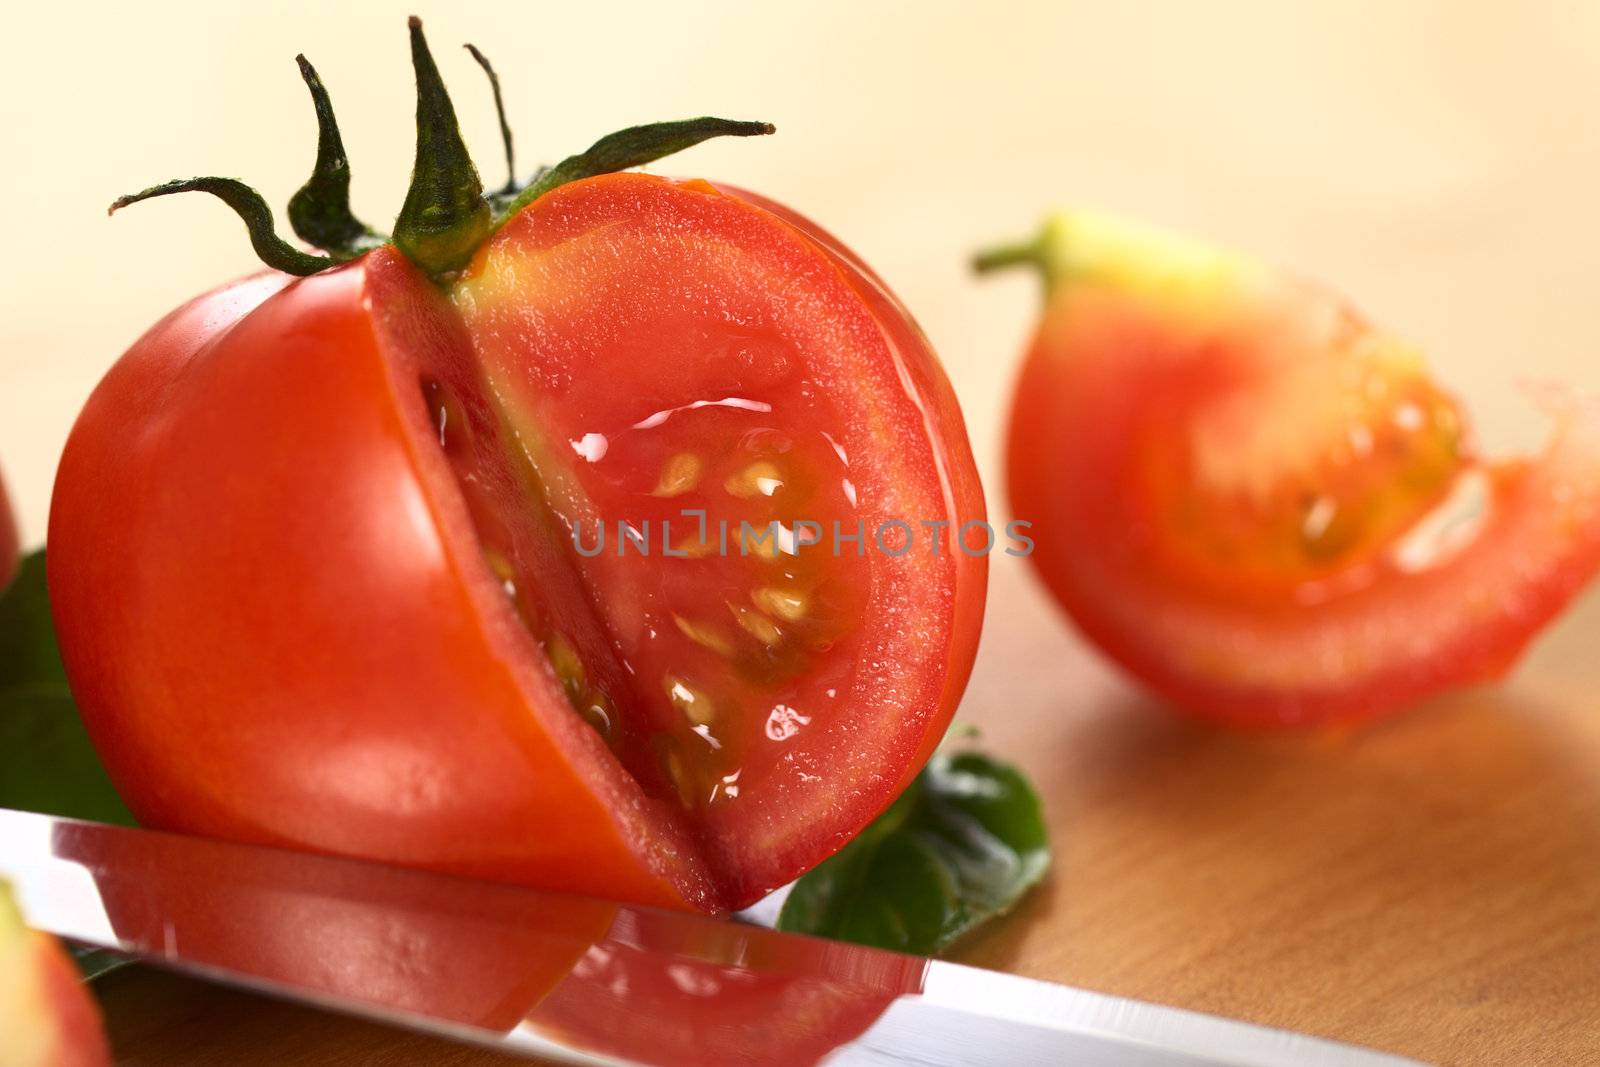 Globe tomato cut open on wooden board with a knife blade laying in front (Selective Focus, Focus on the seeds of the tomato)